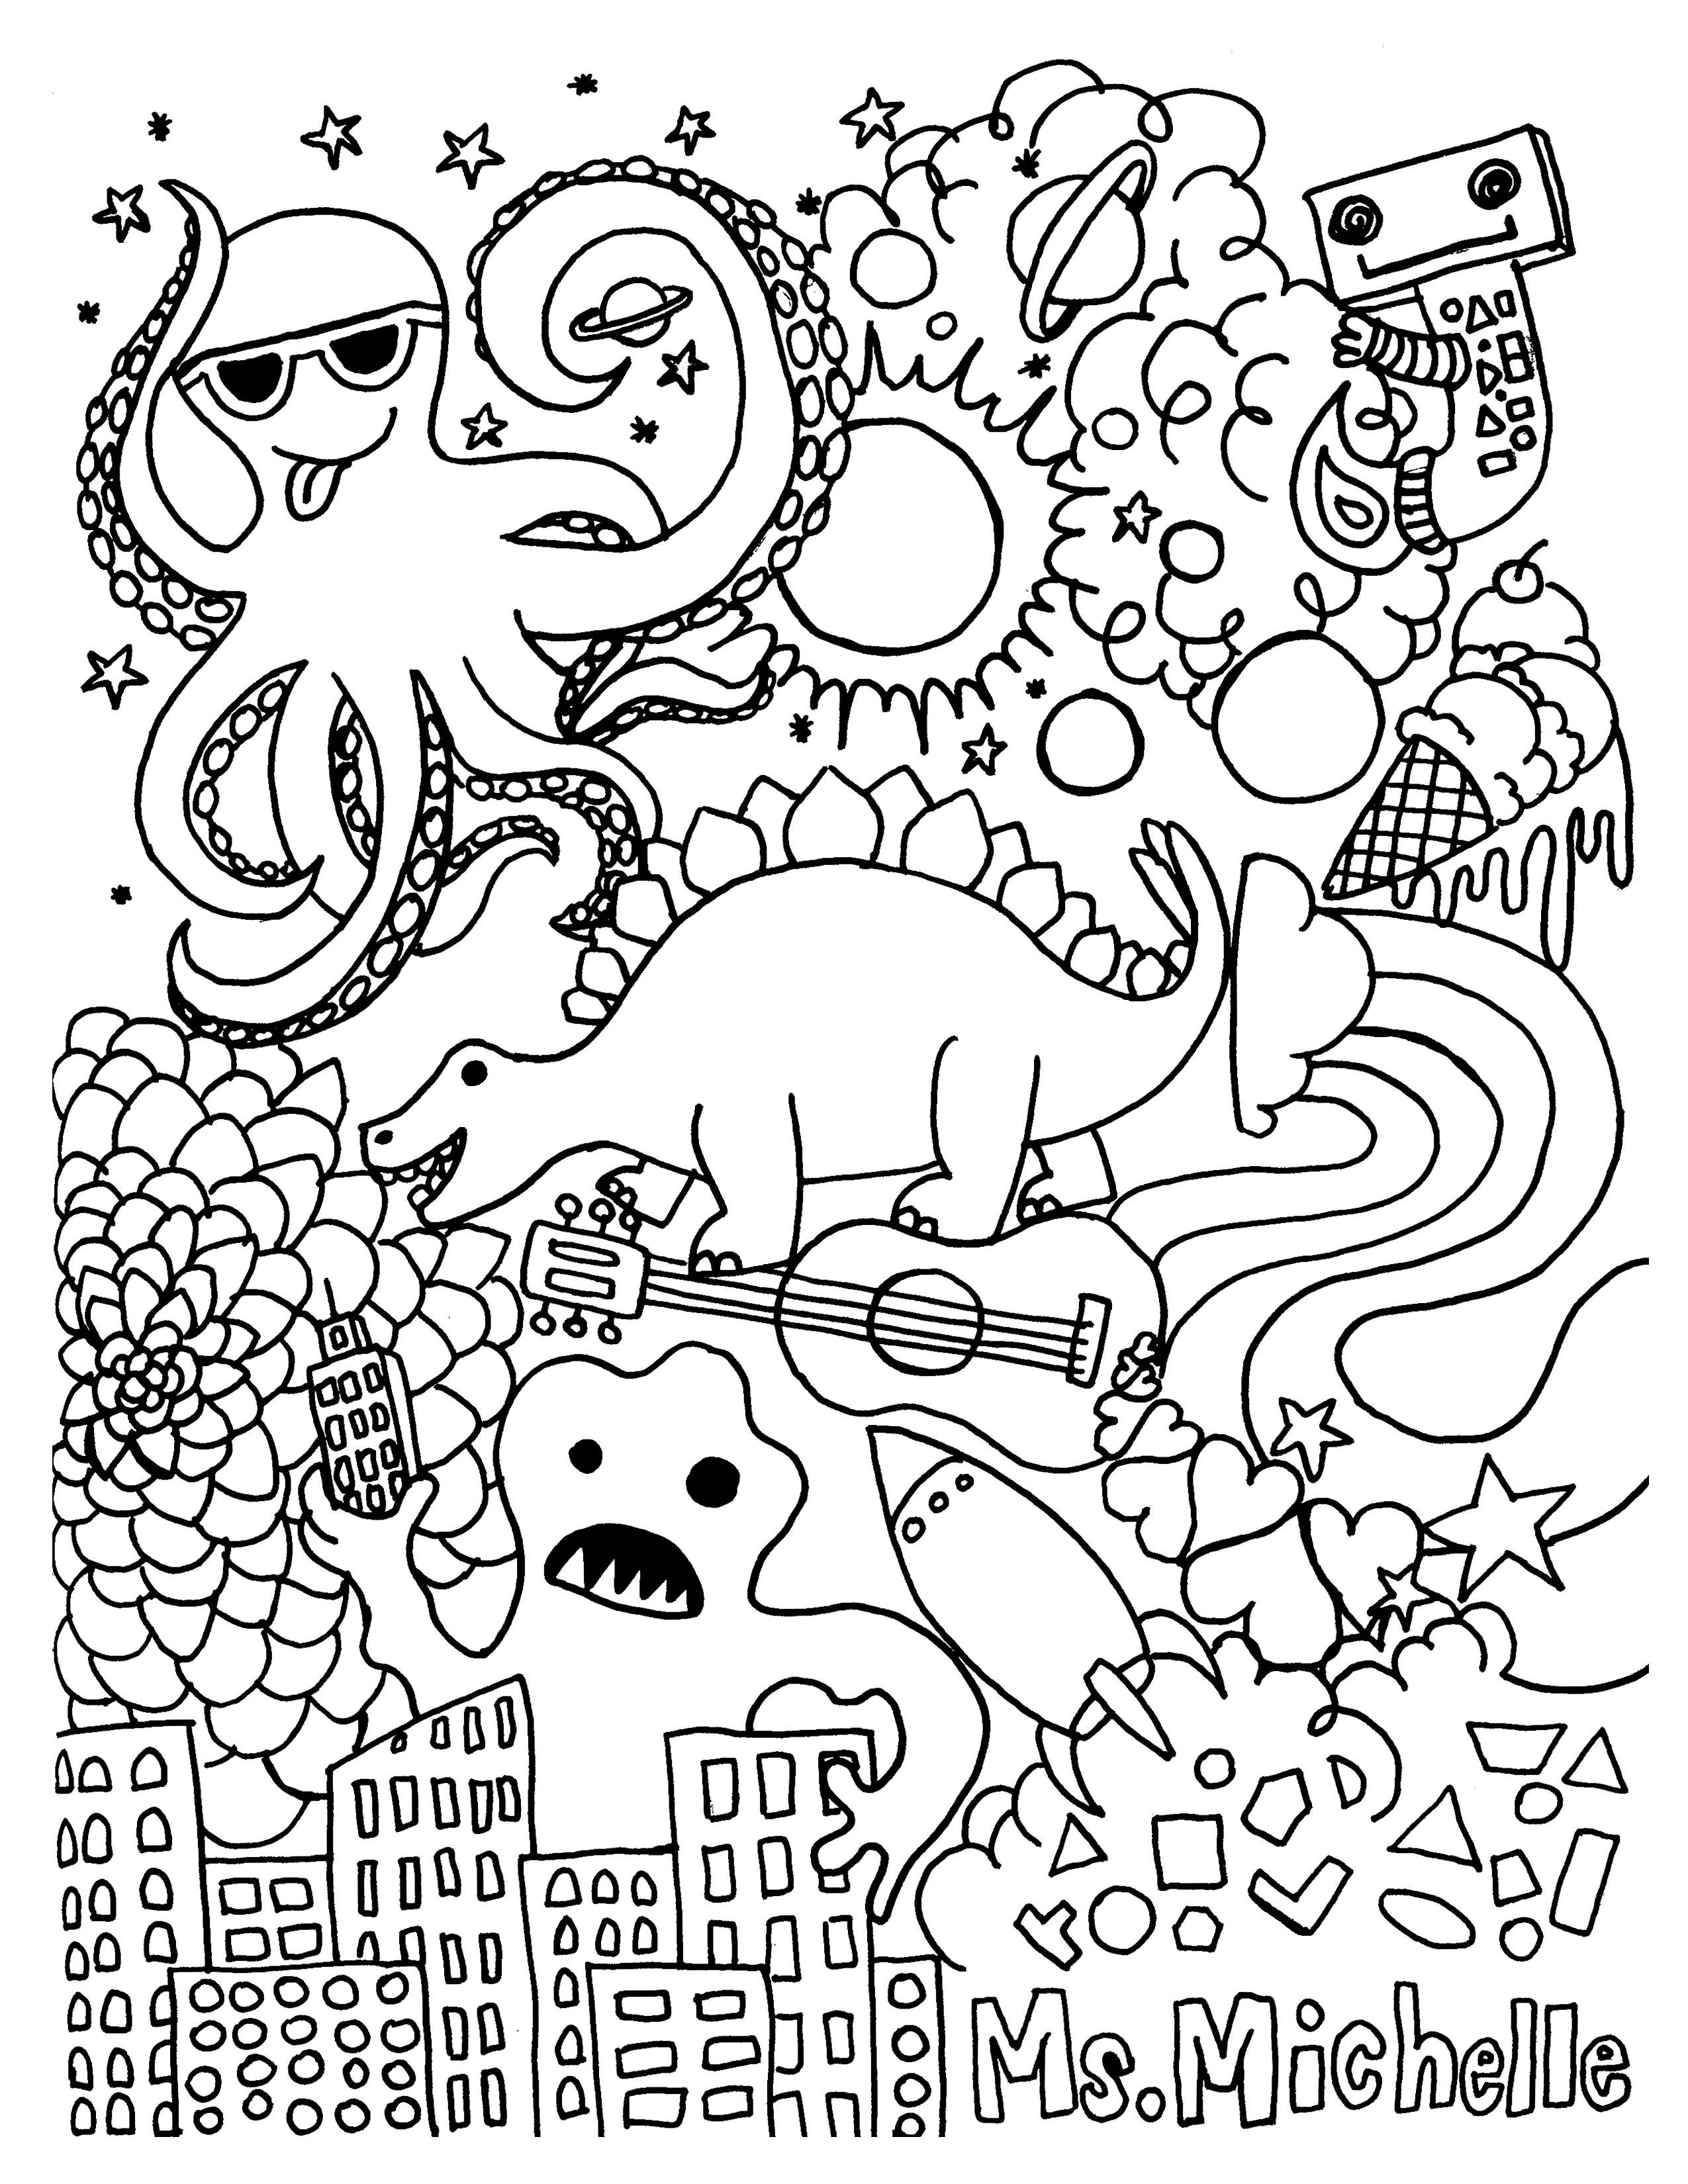 Coloring Pages For 5th Graders - Coloring - Coloring Home